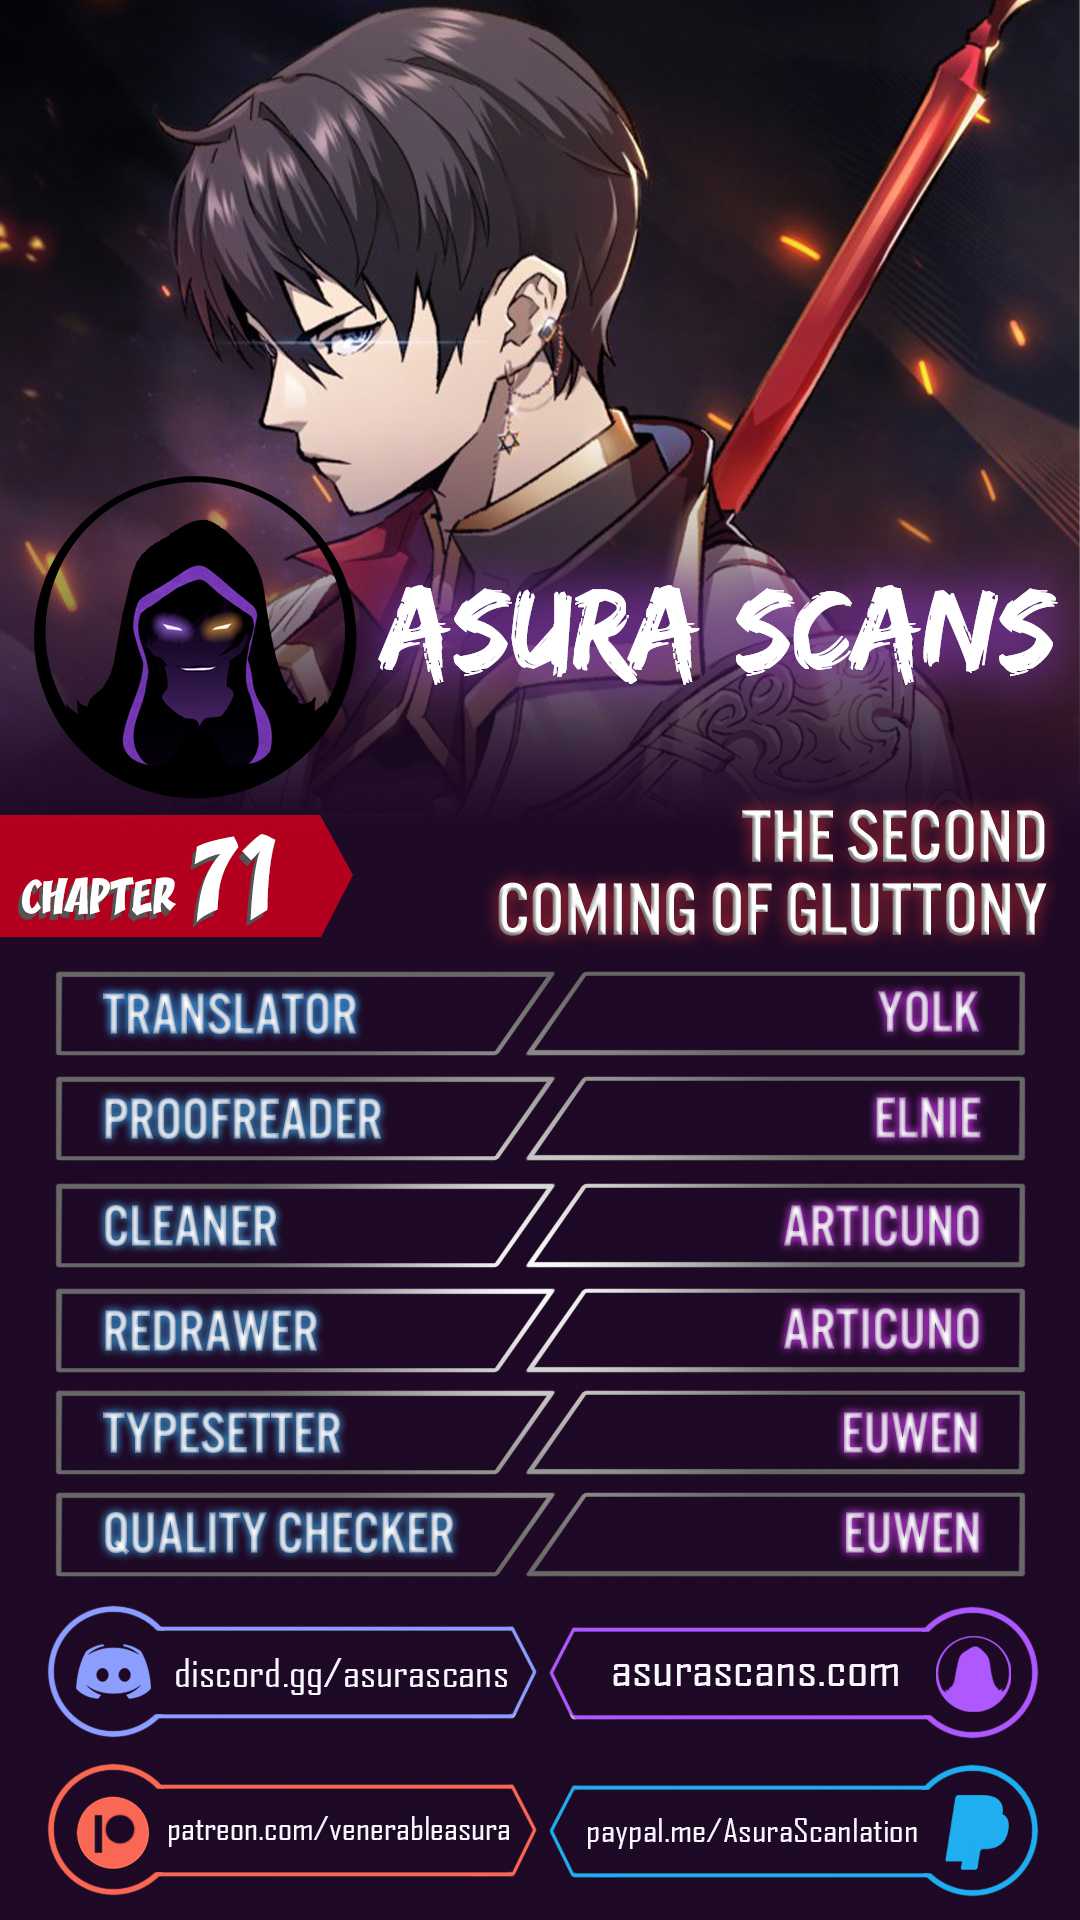 The Second Coming of Gluttony Chapter 71, The Second Coming of Gluttony 71, Read The Second Coming of Gluttony Chapter 71, The Second Coming of Gluttony Chapter 71 Manga, The Second Coming of Gluttony Chapter 71 english, The Second Coming of Gluttony Chapter 71 raw manga, The Second Coming of Gluttony Chapter 71 online, The Second Coming of Gluttony Chapter 71 high quality, The Second Coming of Gluttony 71 chapter, The Second Coming of Gluttony Chapter 71 manga scan